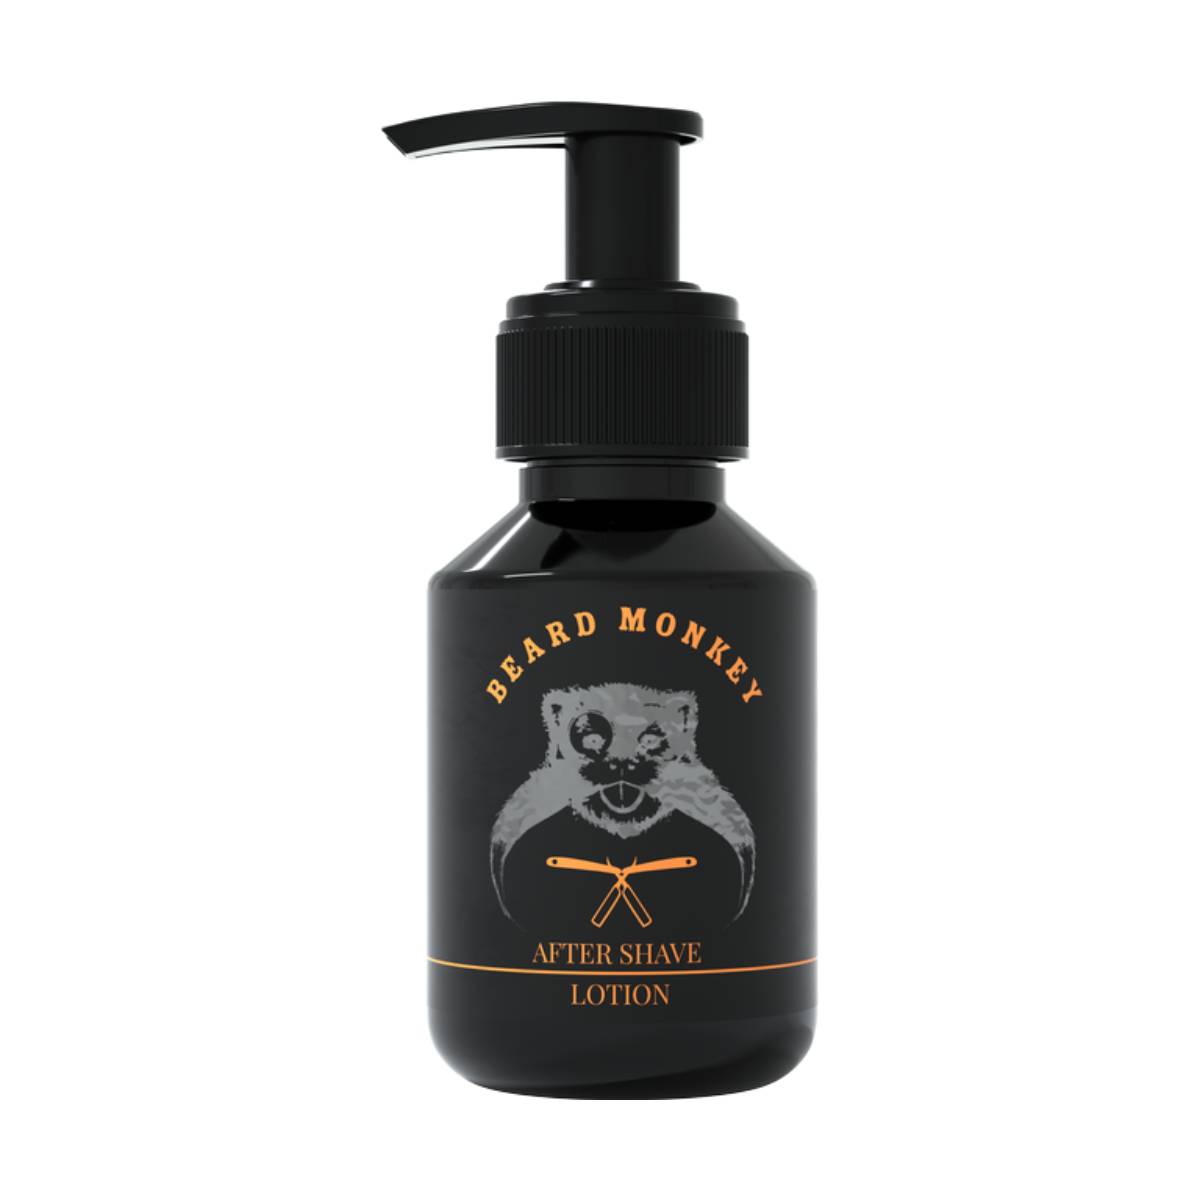 Beard Monkey Aftershave Lotion 60ml